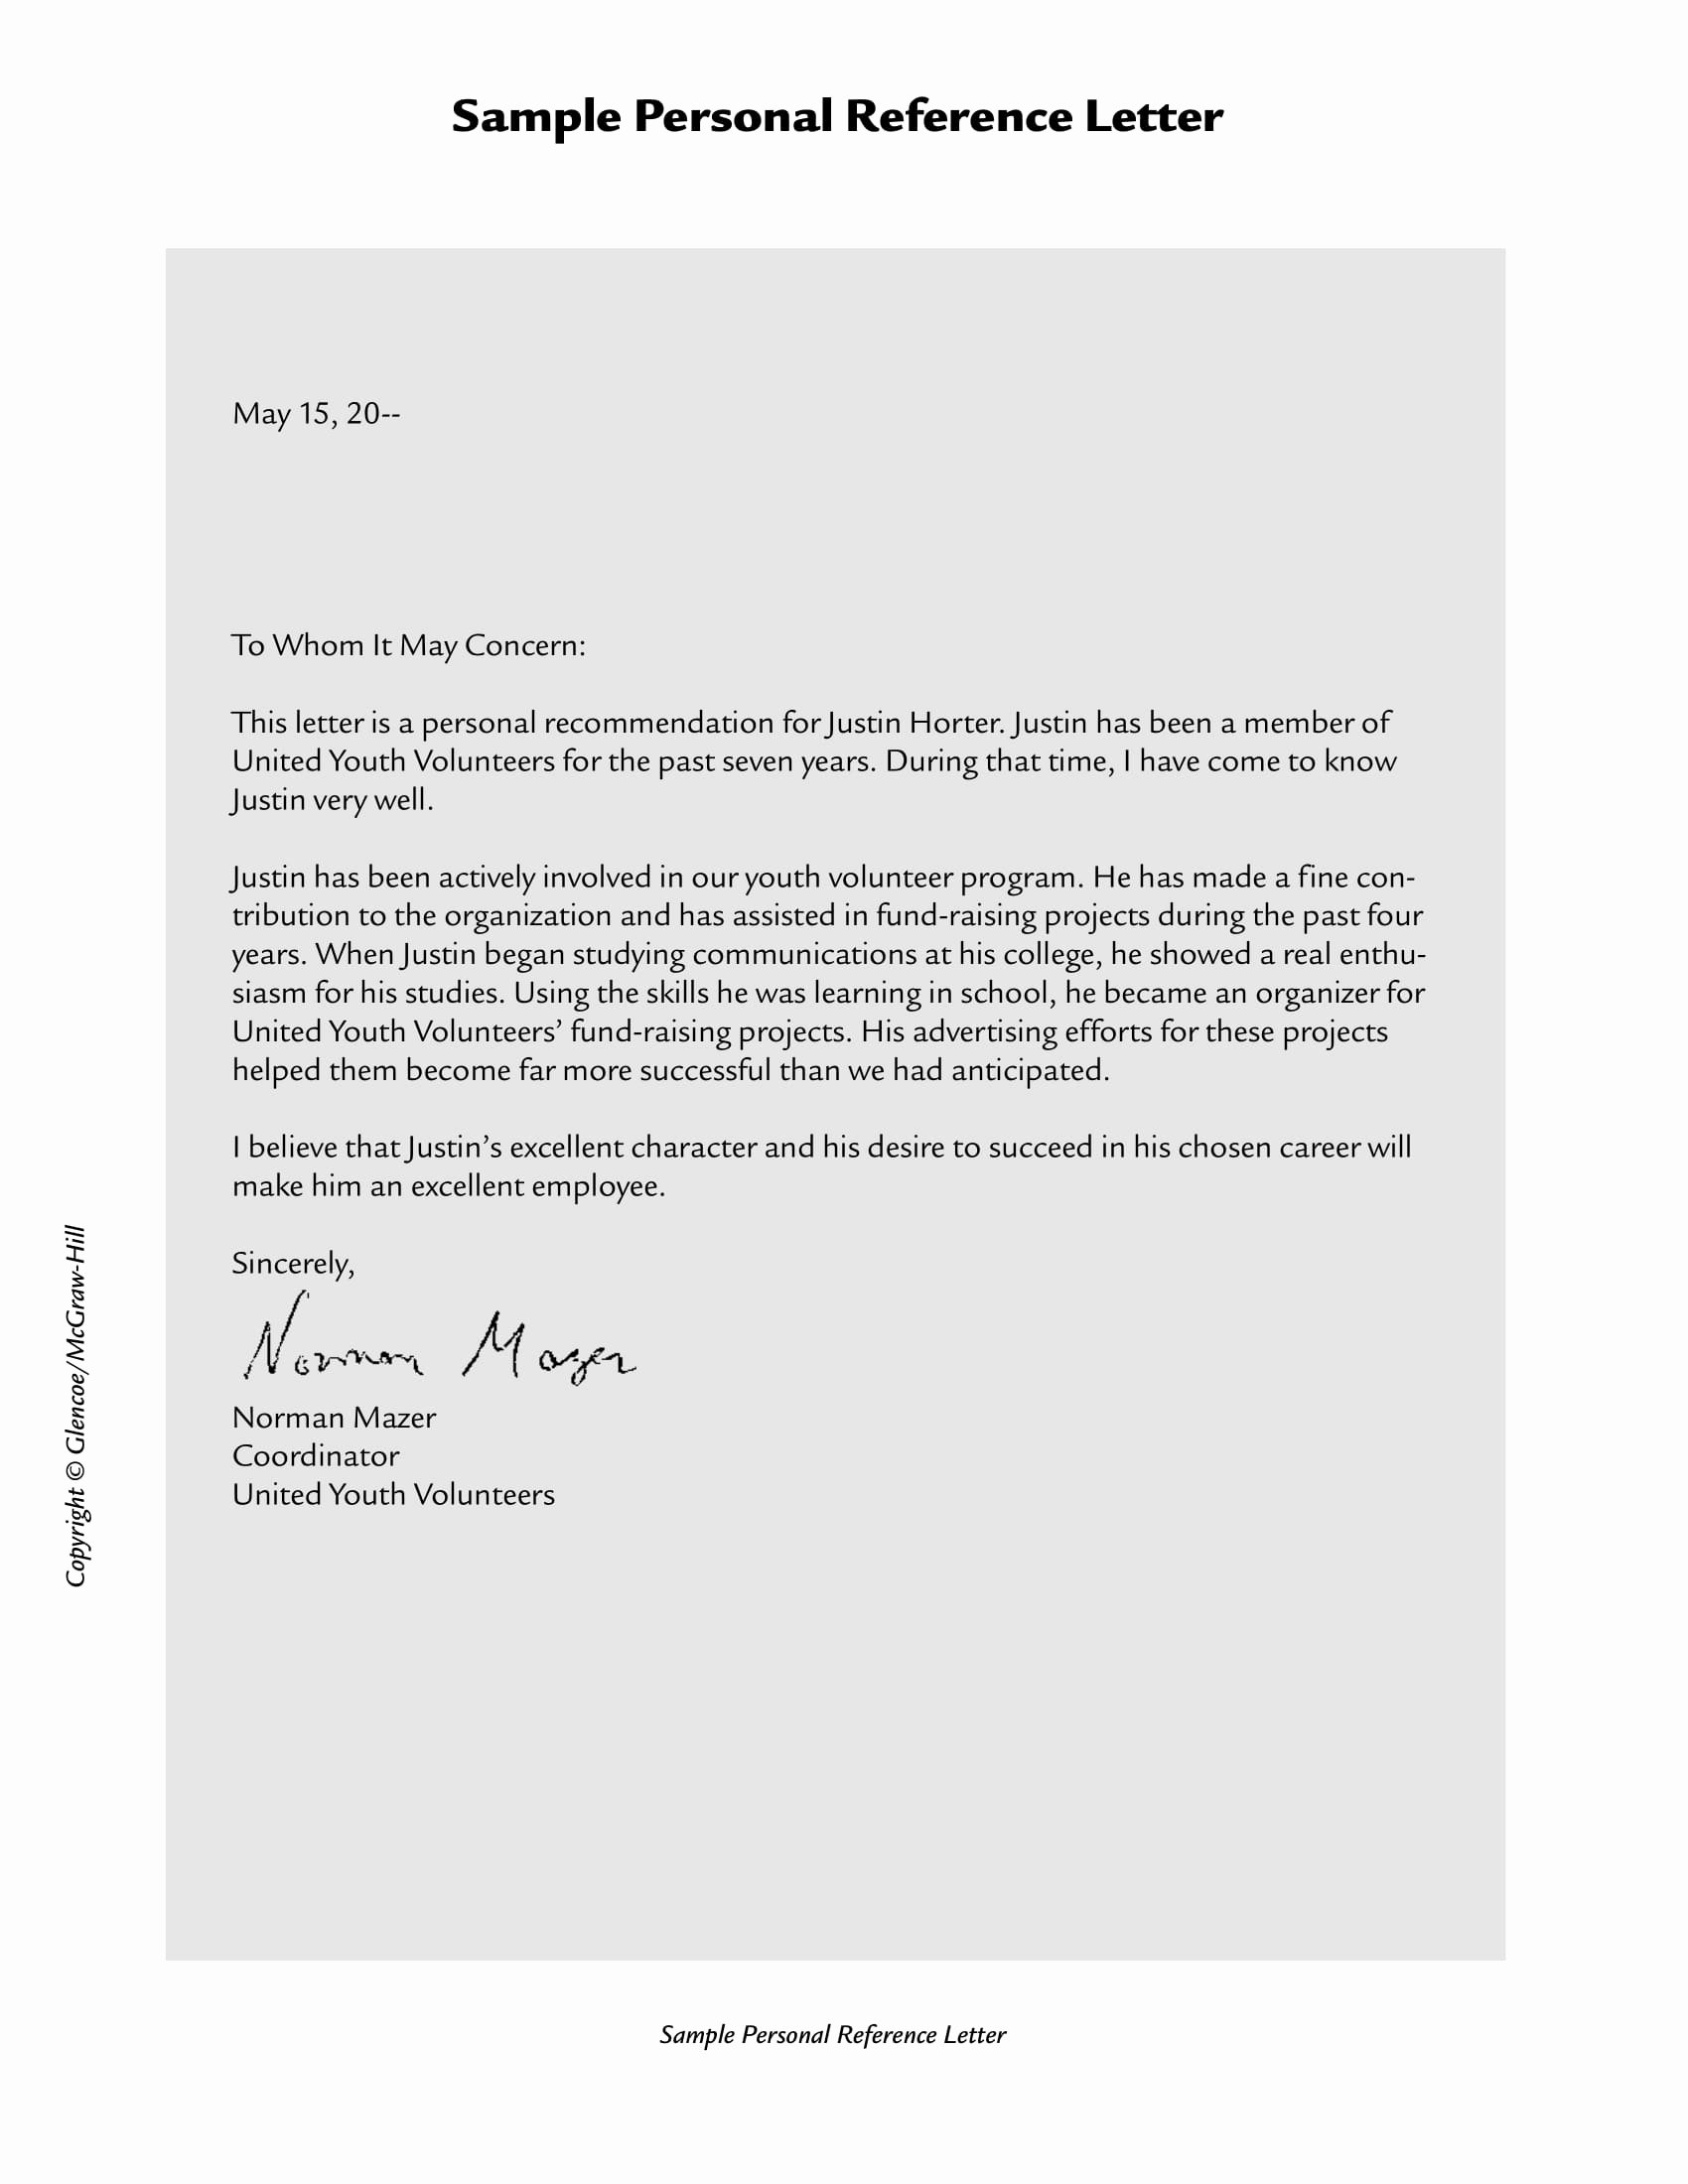 Personal Recommendation Letter Sample Lovely 10 Personal Re Mendation Letter Examples Pdf Word